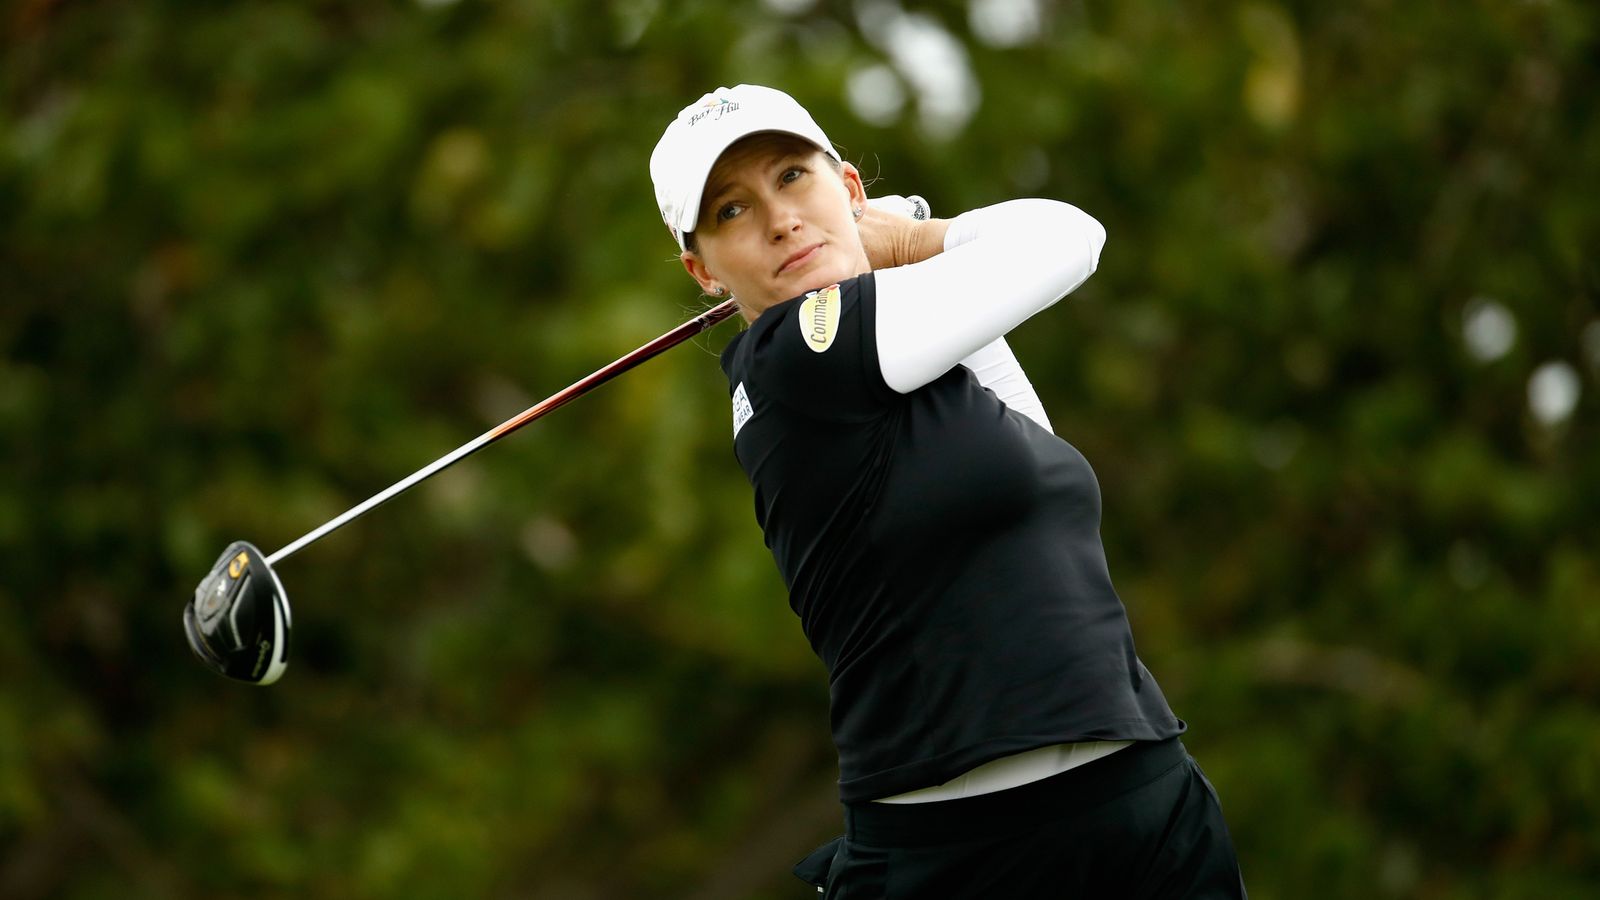 Sarah Jane Smith four clear at US Women's Open after second round hit ...